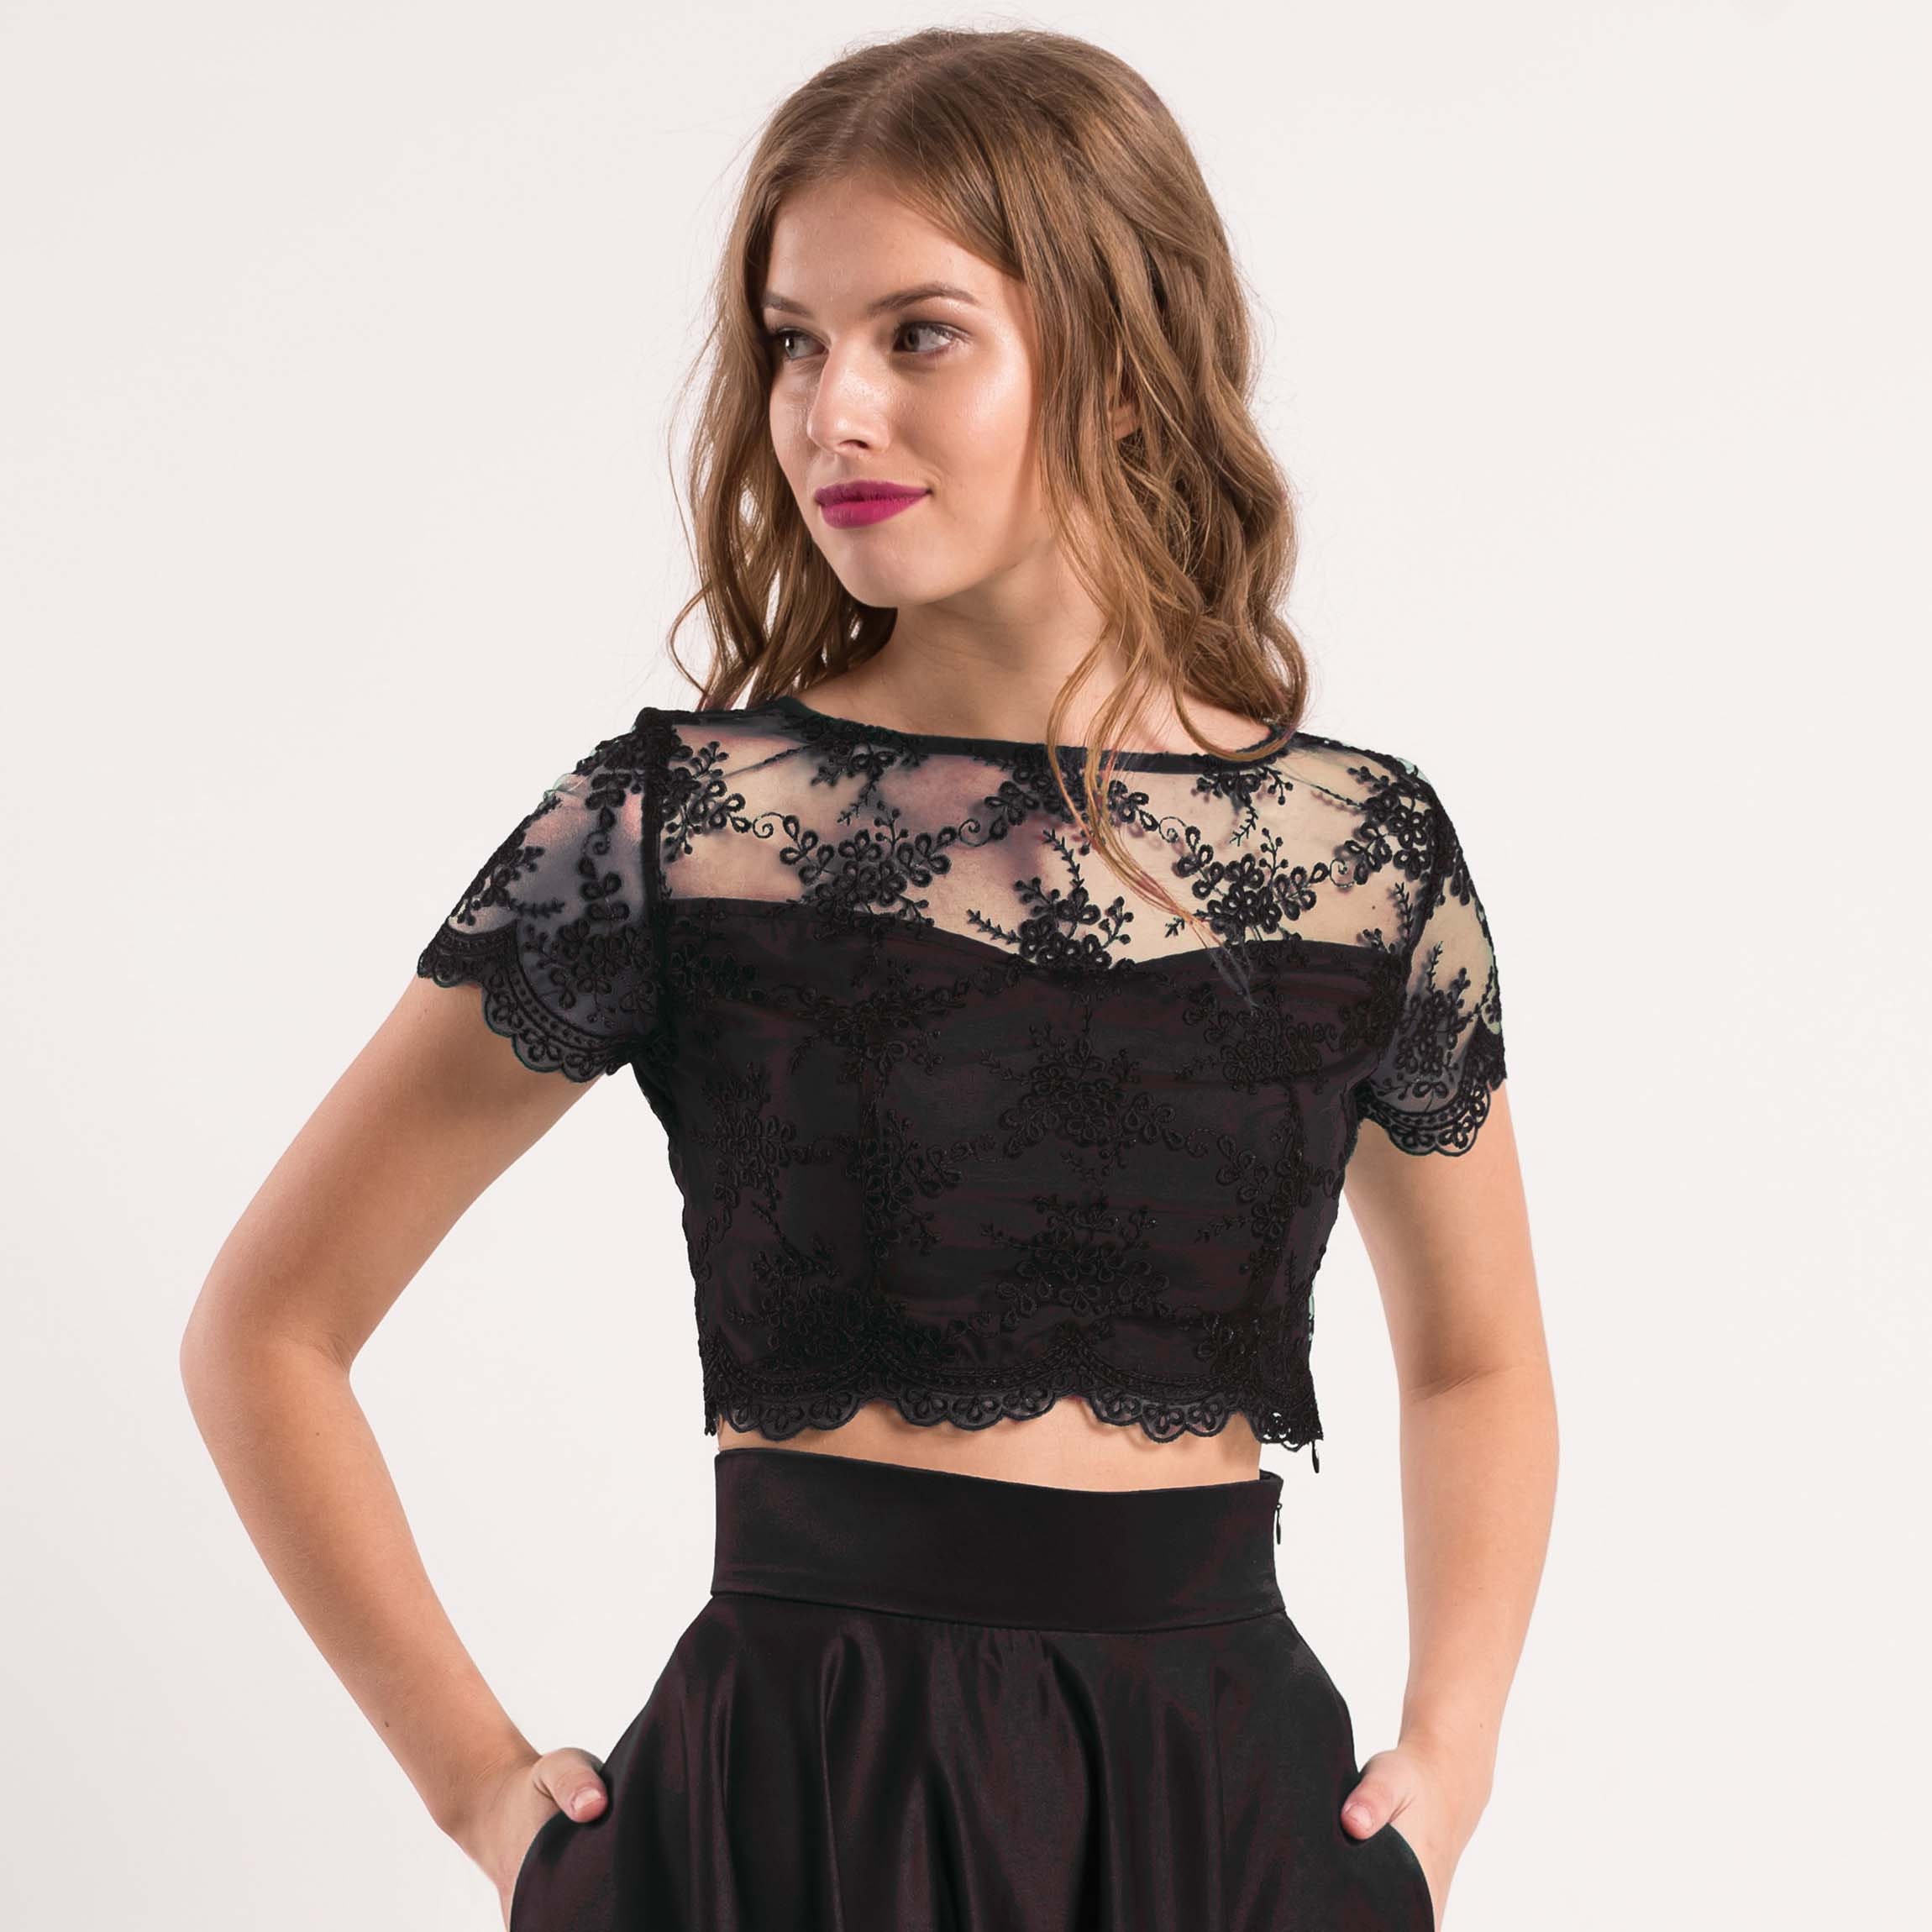 Evening Black Crop Top / Lace Top With Buttons / Crop Top Prom Dress /  Floral Lace Top With Short Sleeves / Evening Gown 